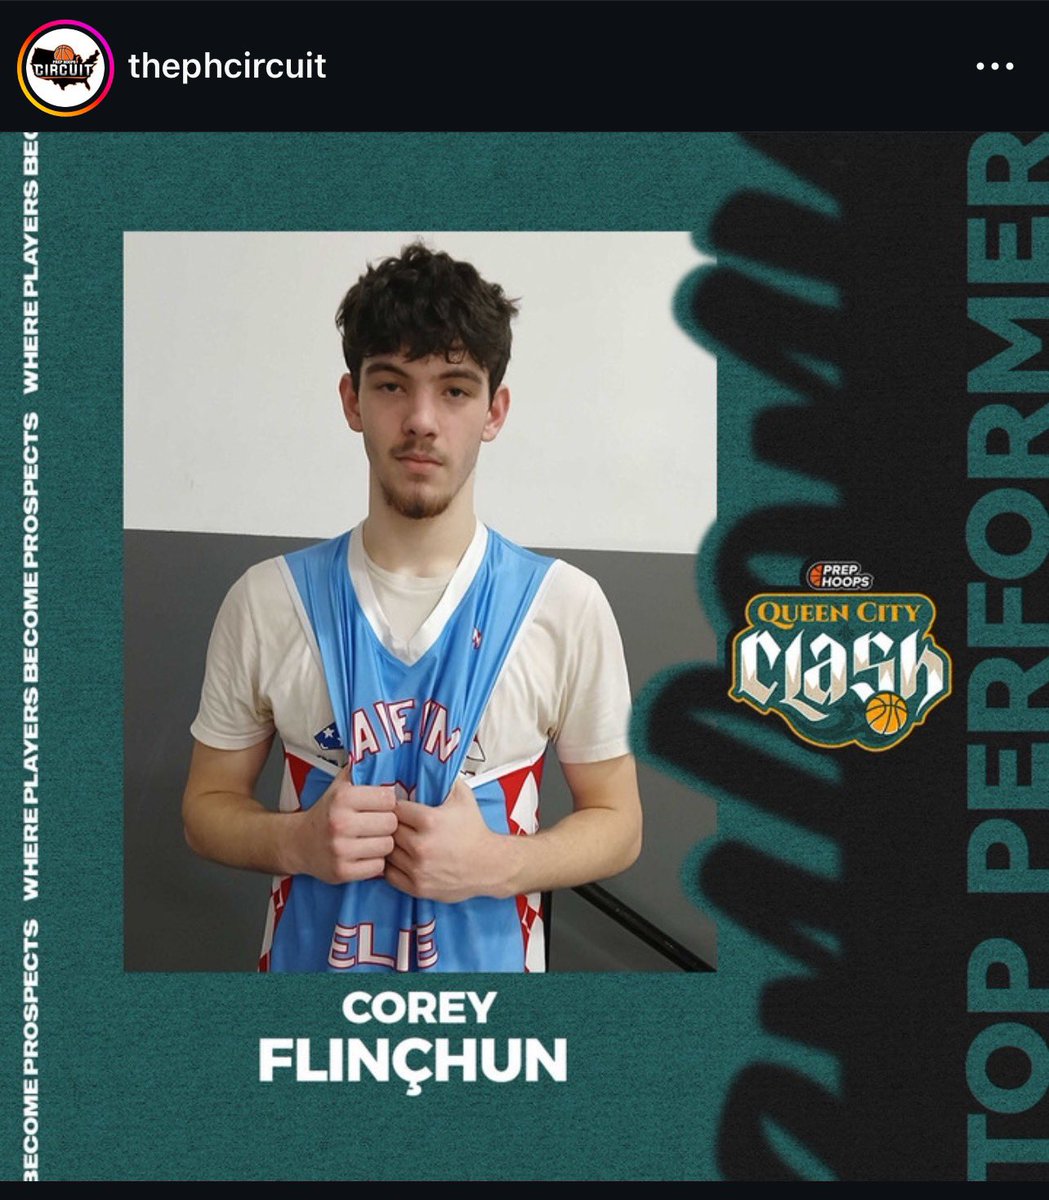 Congrats to @CoreyFlinchum for earning recognition as a top performer over the weekend at the @PHCircuit Queen City Clash! One of the top freshman in Kentucky. @Mints2u29 @KY_PrepReport @NexUpRecruits @HLpreps @PrepHoopsKY @getmerecruited @TravisGrafHoops